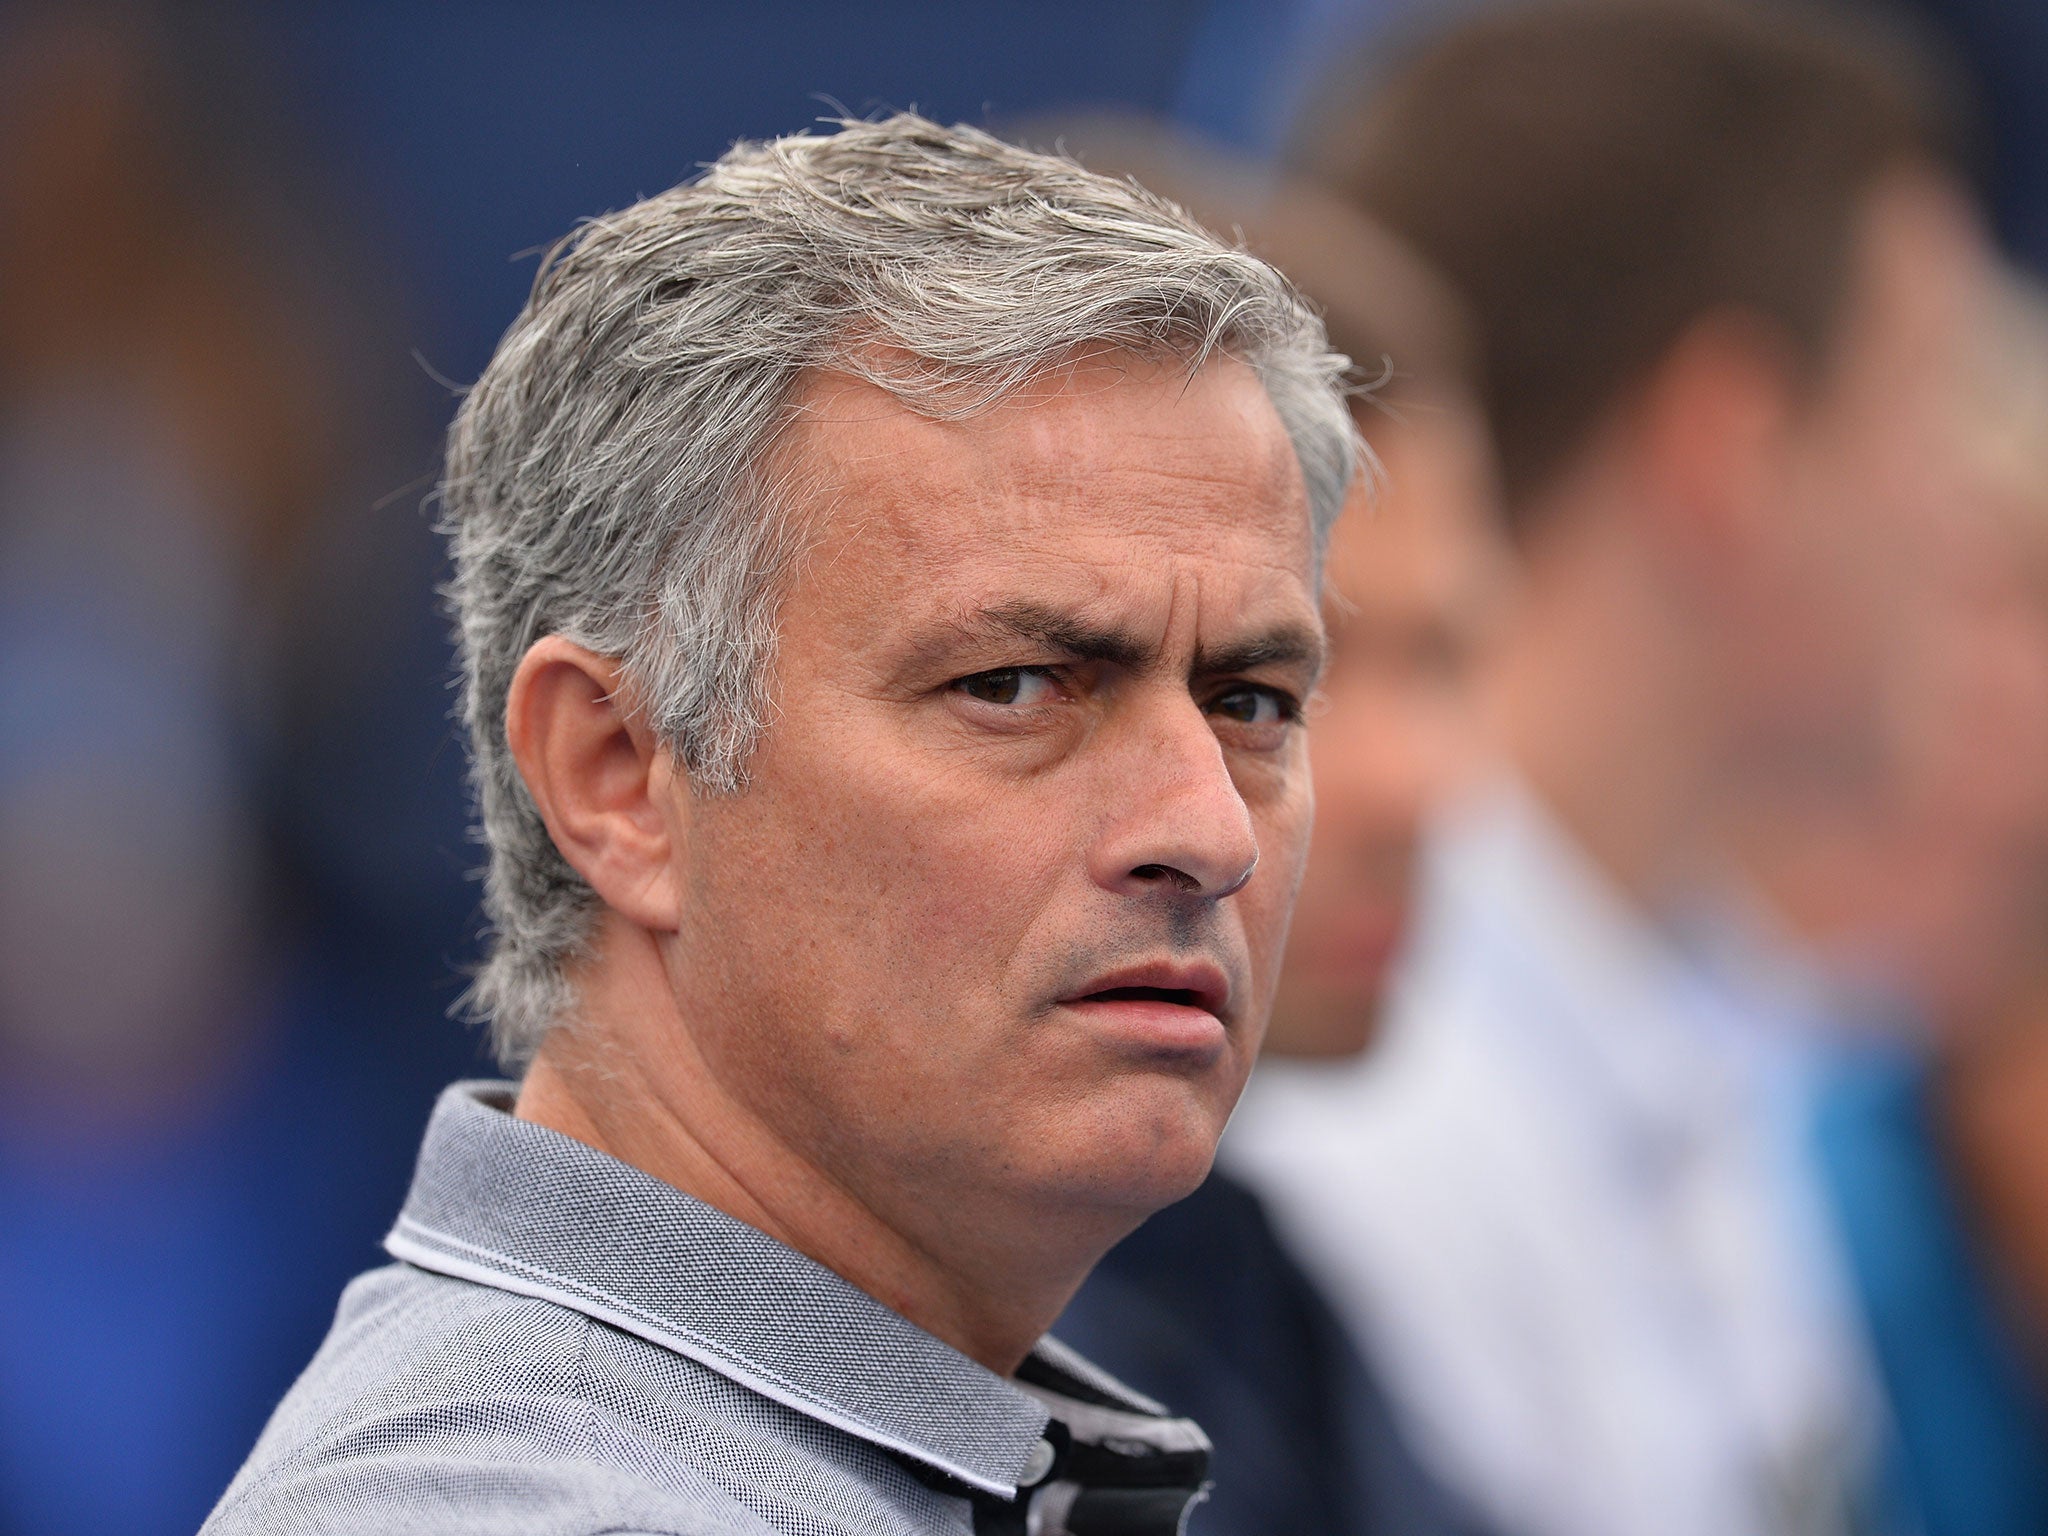 Jose Mourinho looks on from the sidelines